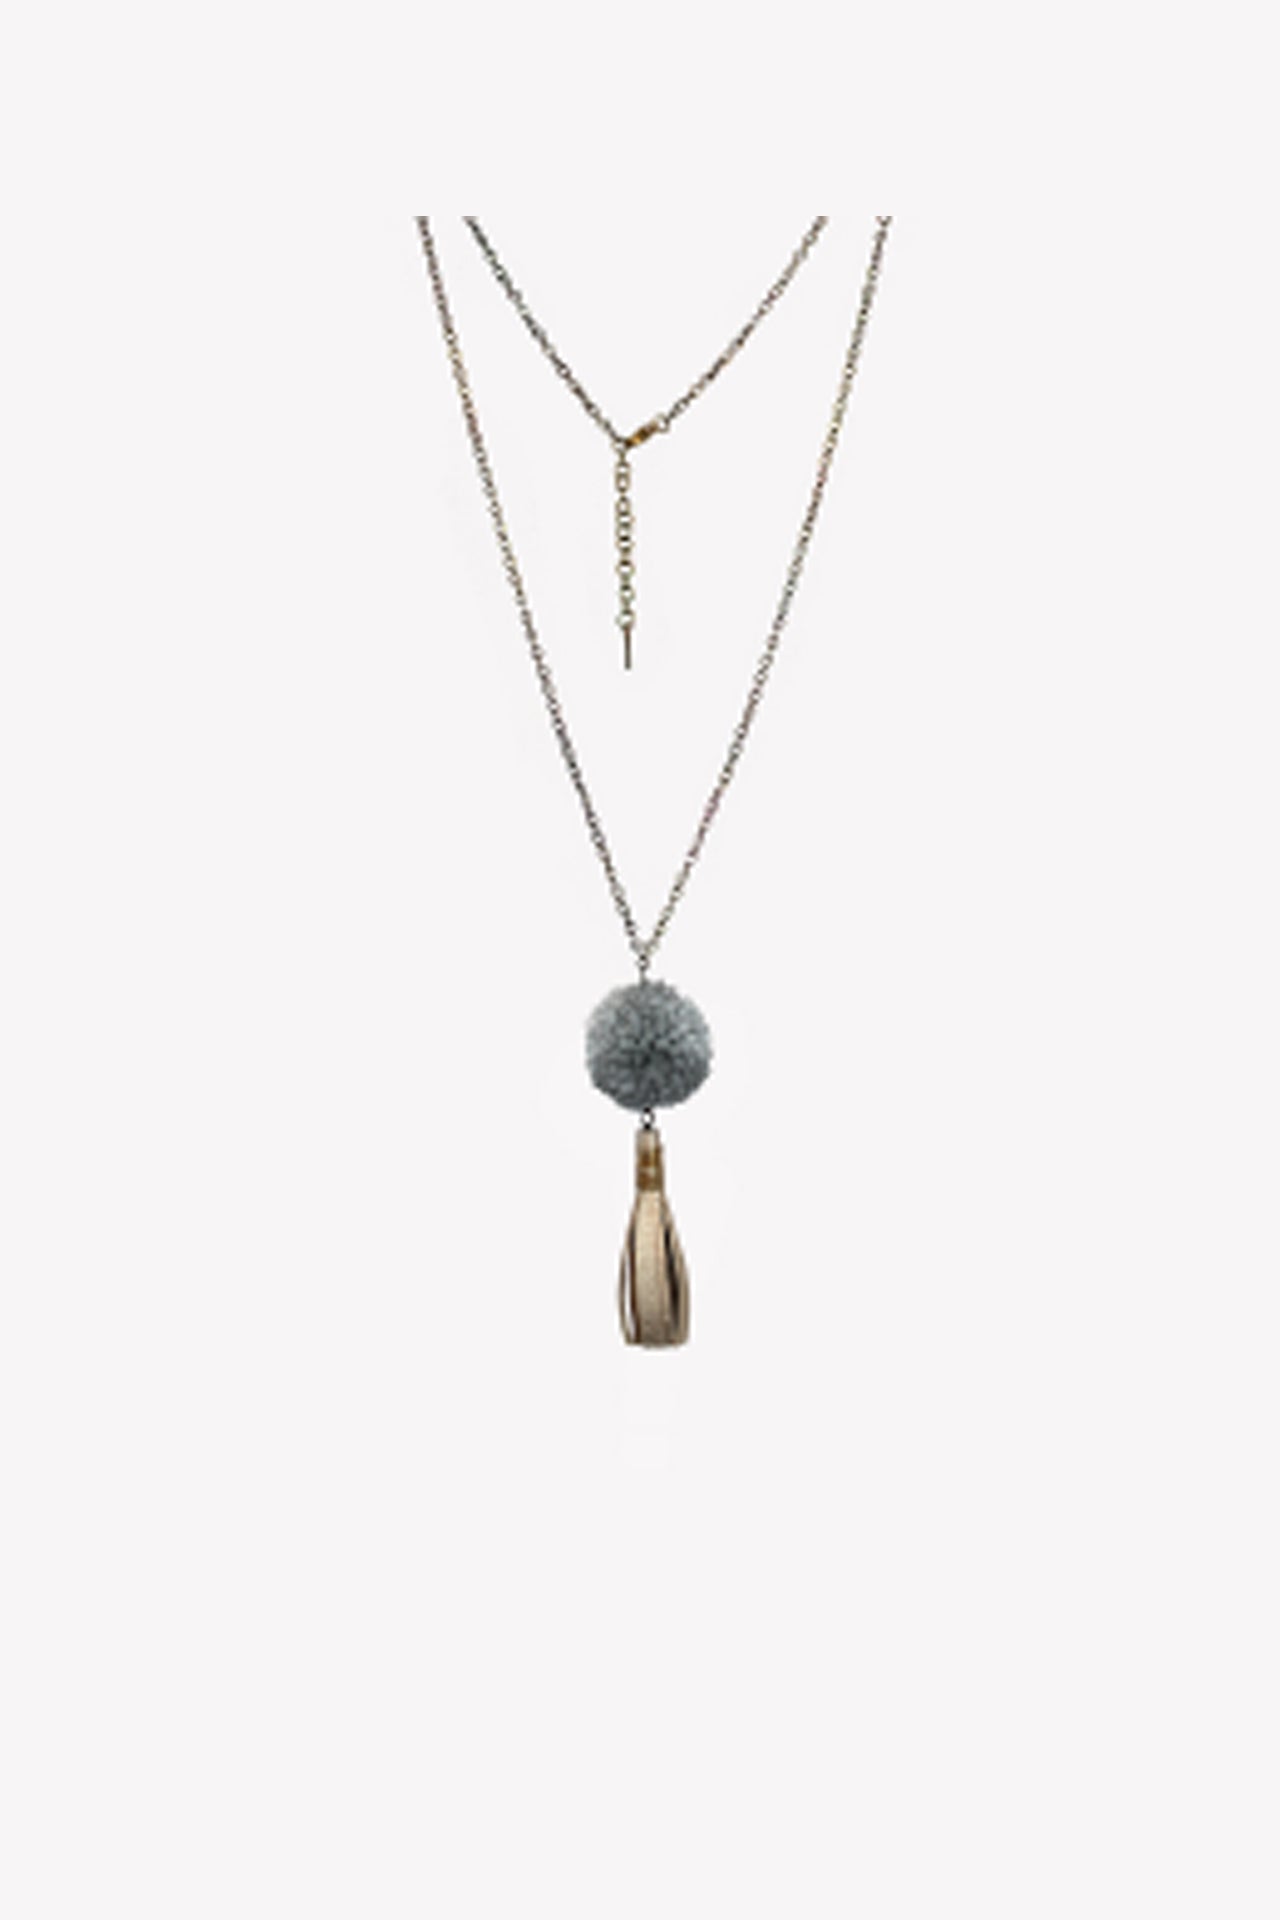 Long statement necklace with gray pompom and leather tassel